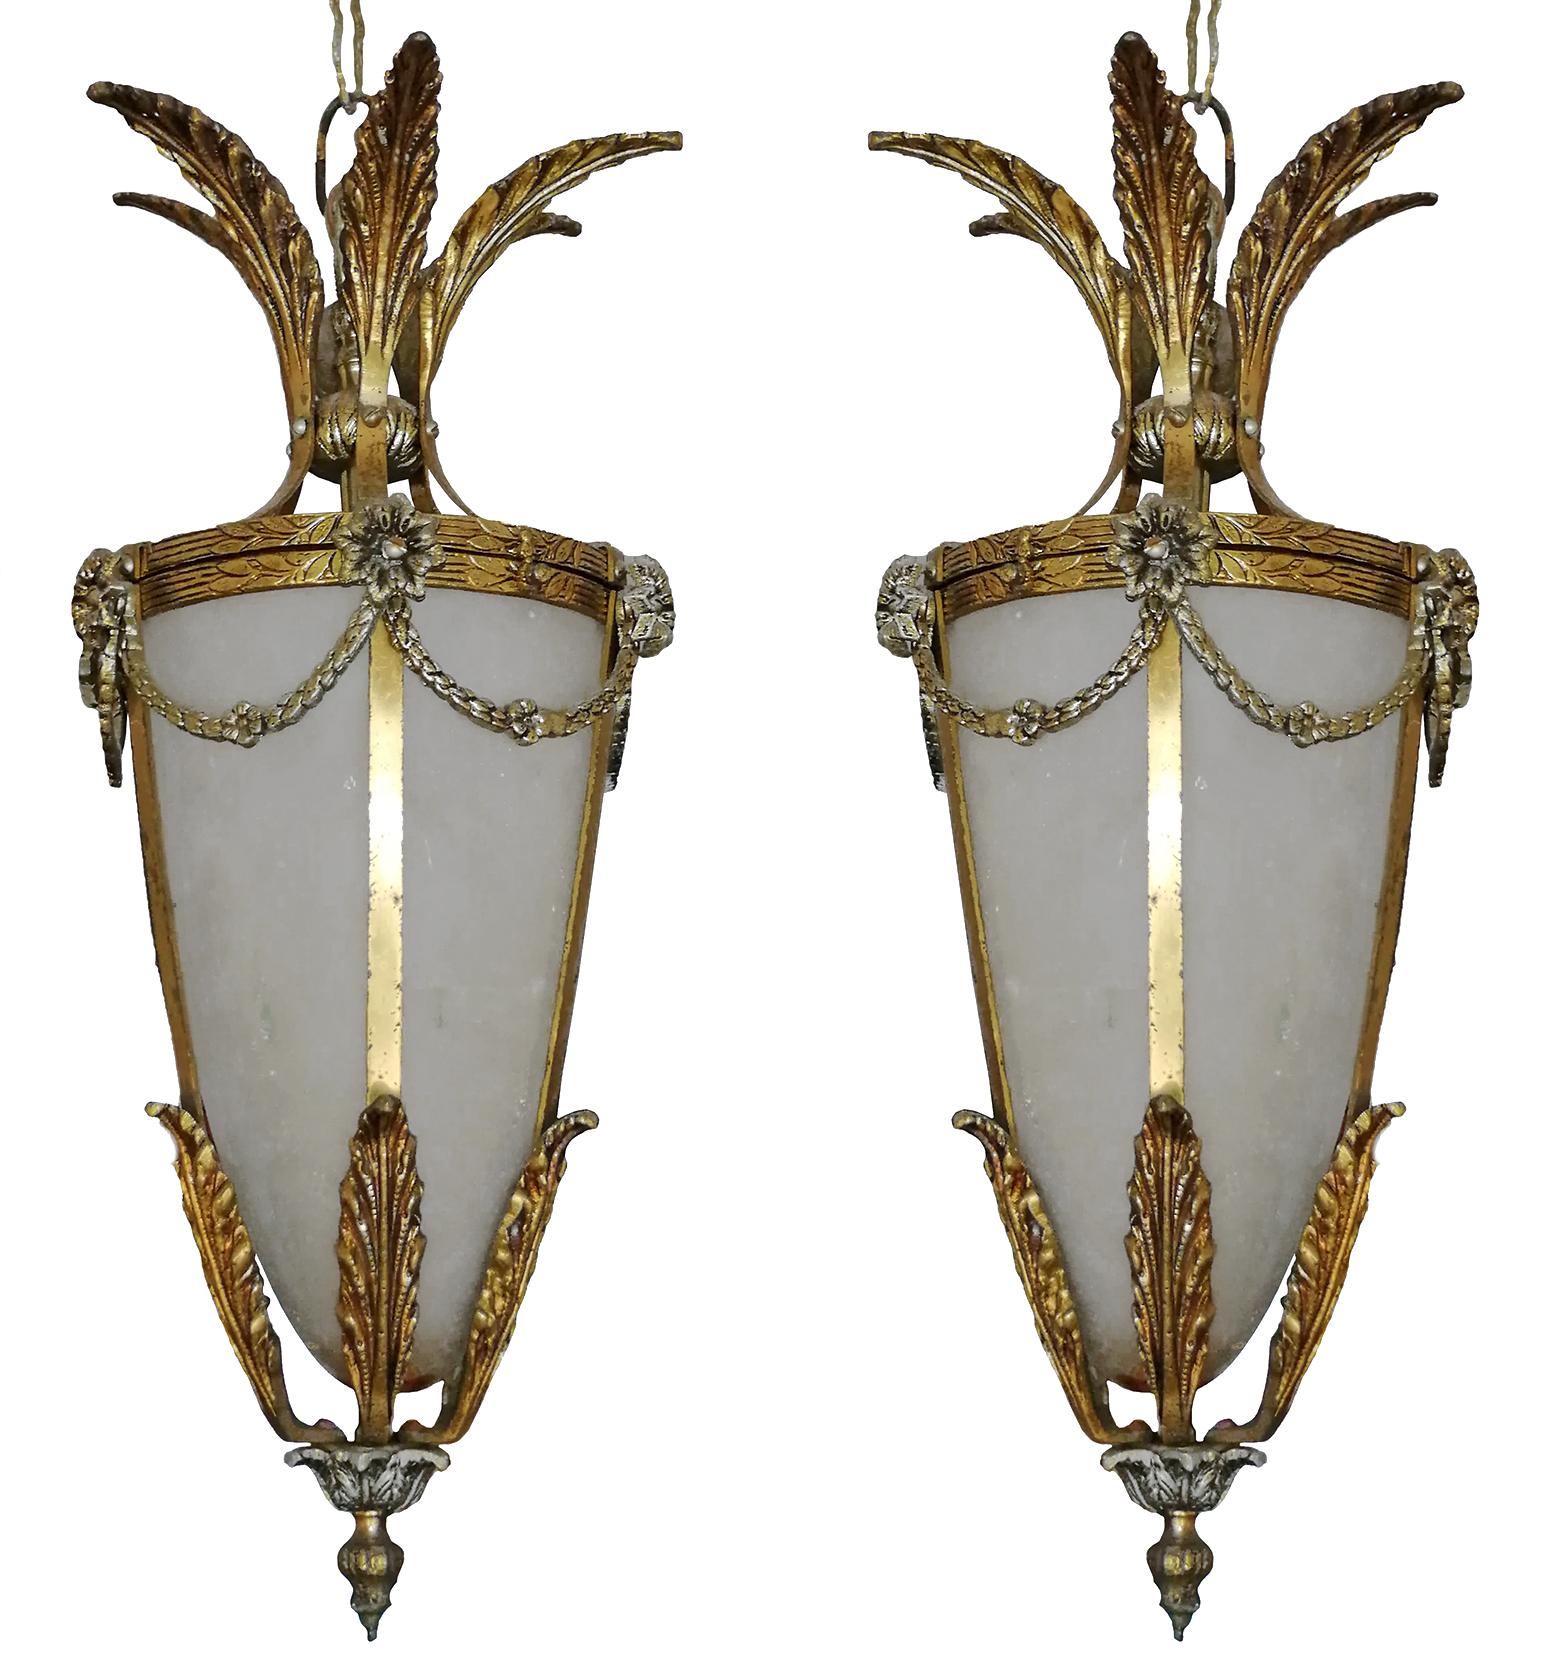 Beautiful pair of French gilt palm tree Hollywood Regency frosted glass lantern with cone-shaped frosted glass shade.
Measures:
Diameter 8.50